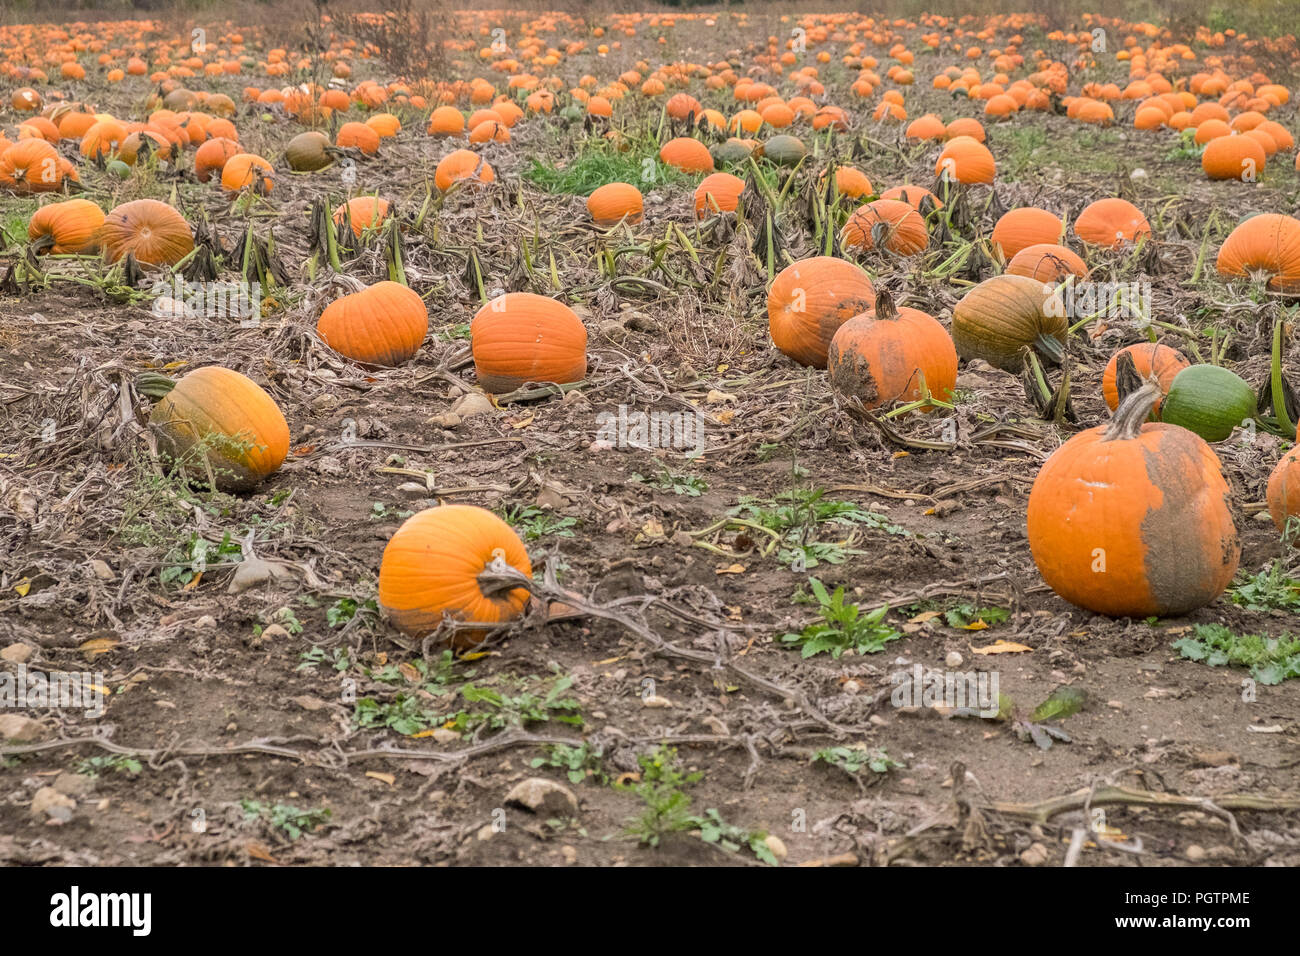 A farmers field in Stouffville Ontario Canada containing many large ripe pumpkins ready for harvest. Stock Photo